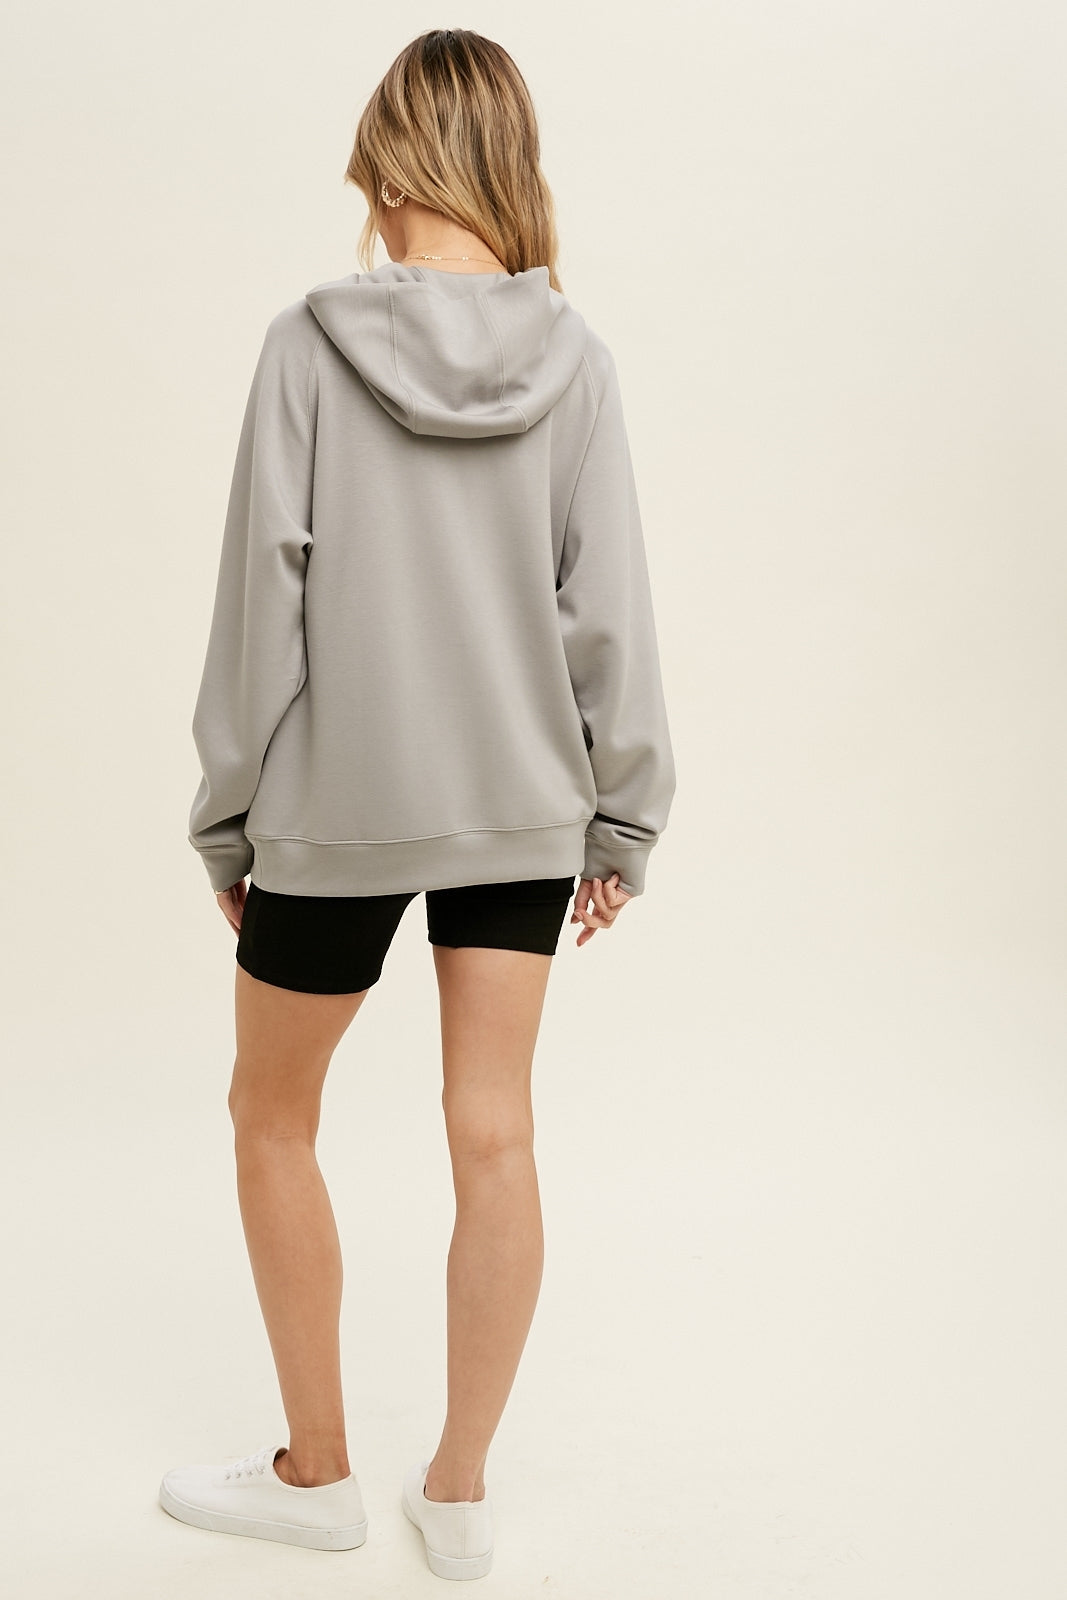 Wishlist® Soft touch Casual Knit Hoodie- Stone